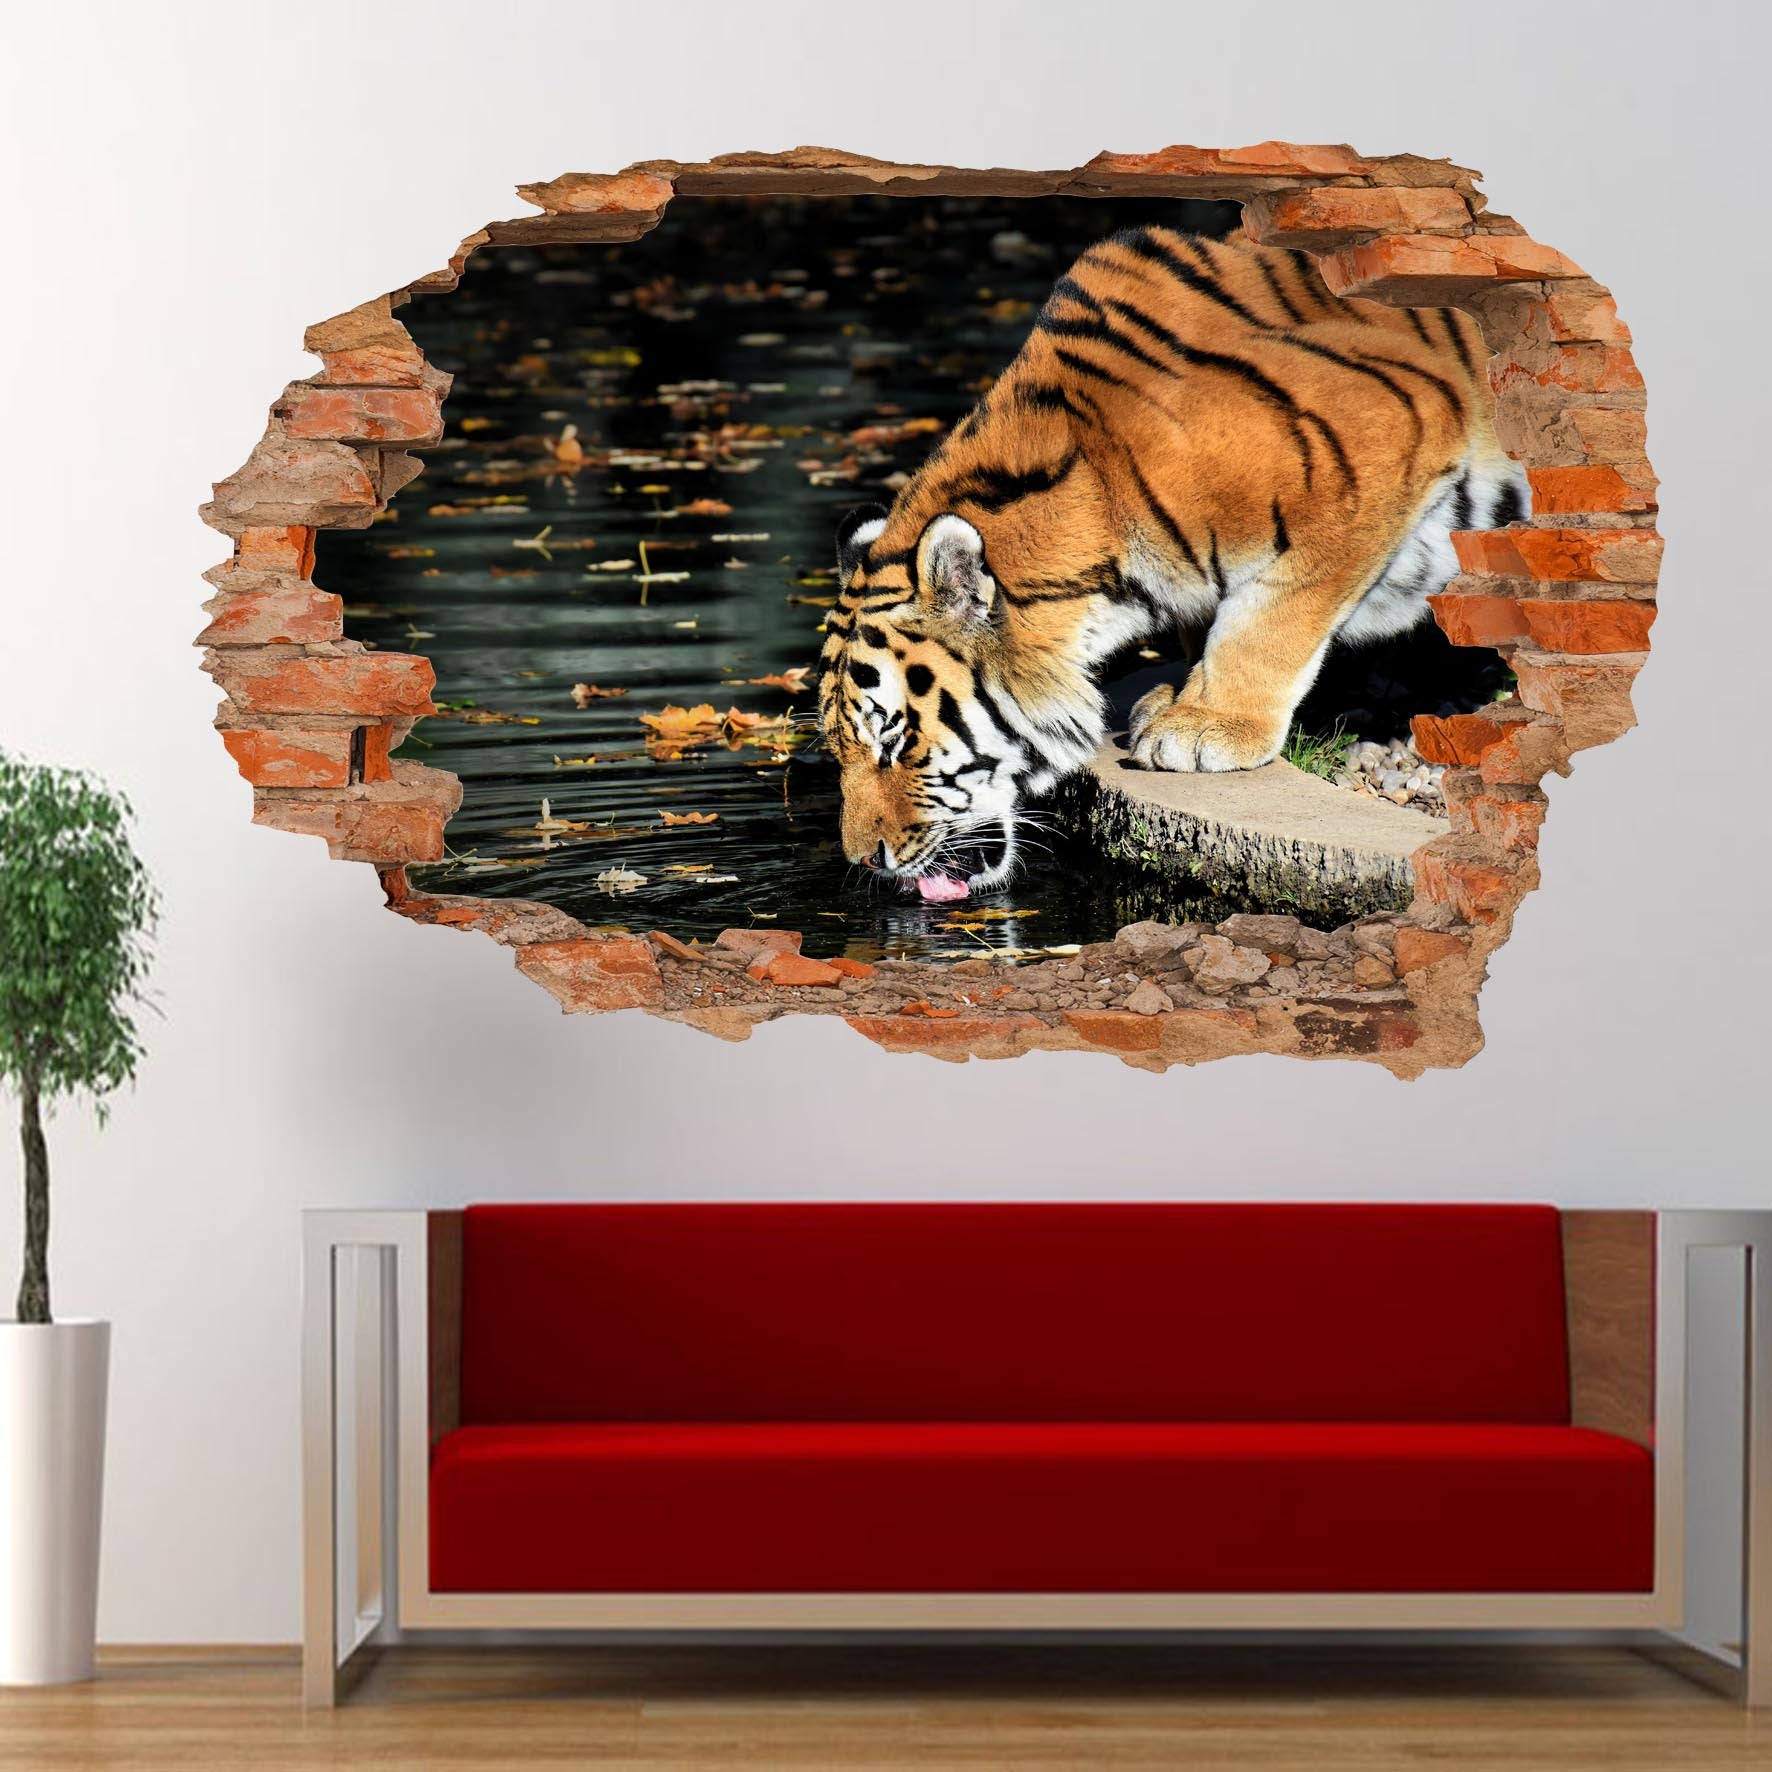 Bengal Tiger Wall Sticker Poster Decal Mural